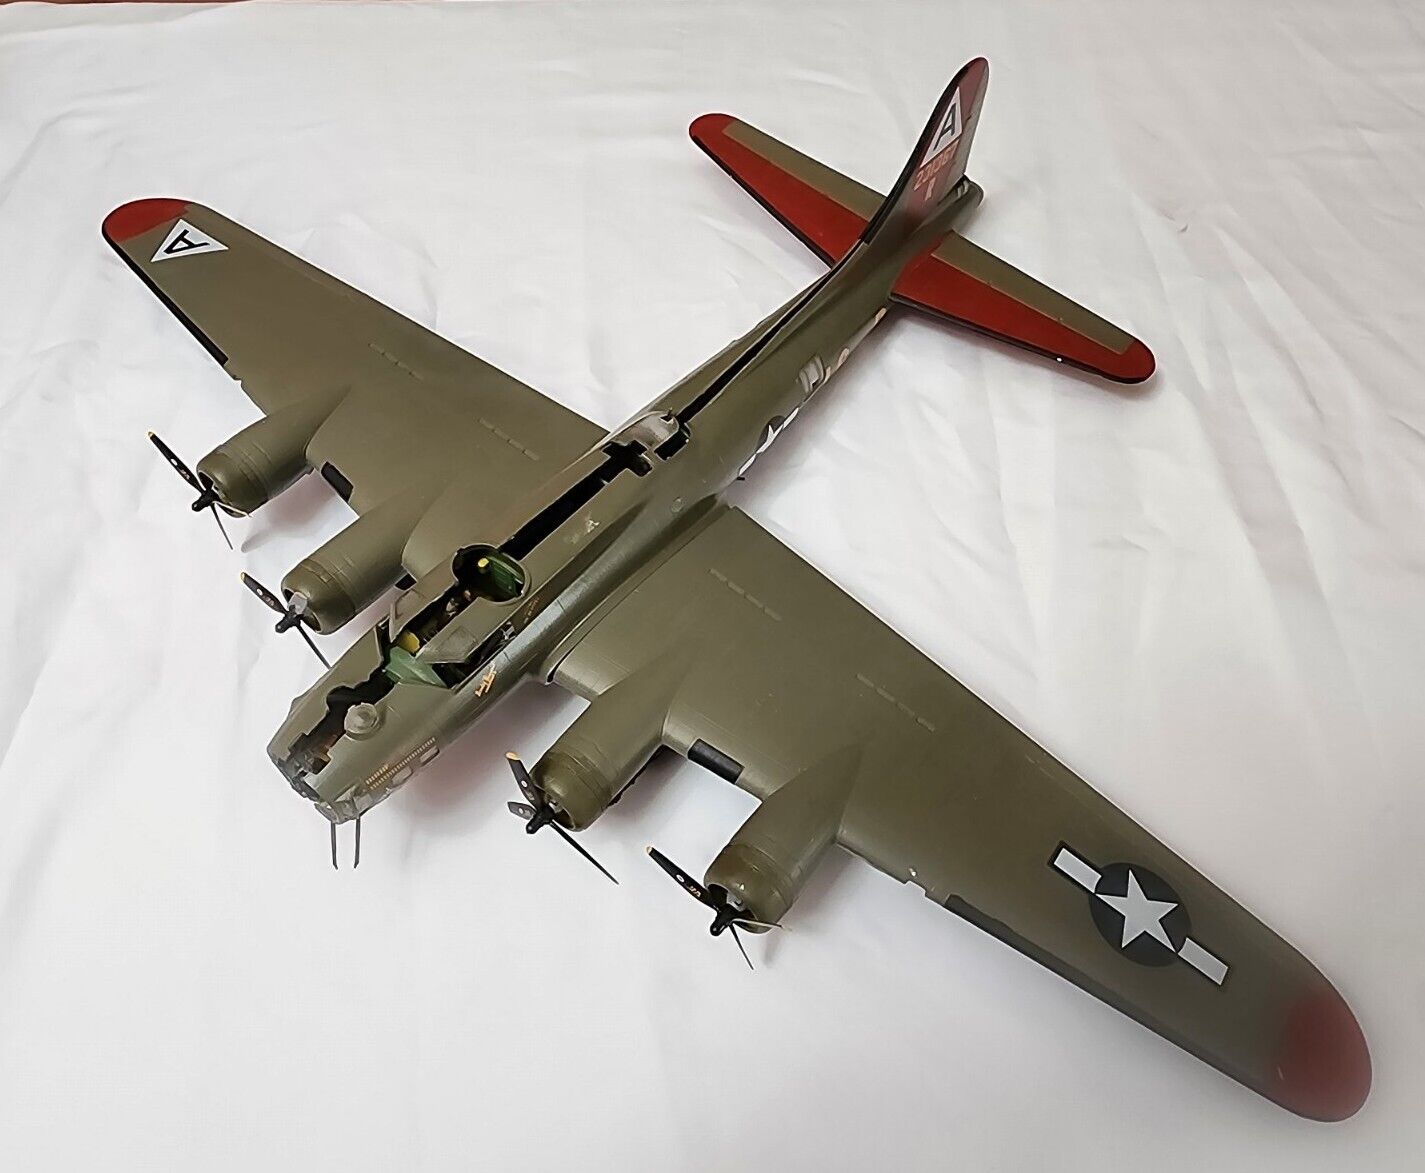 Monogram 1/48 Scale WW II B-17 Flying Fortress - Built, Great for Diorama - READ